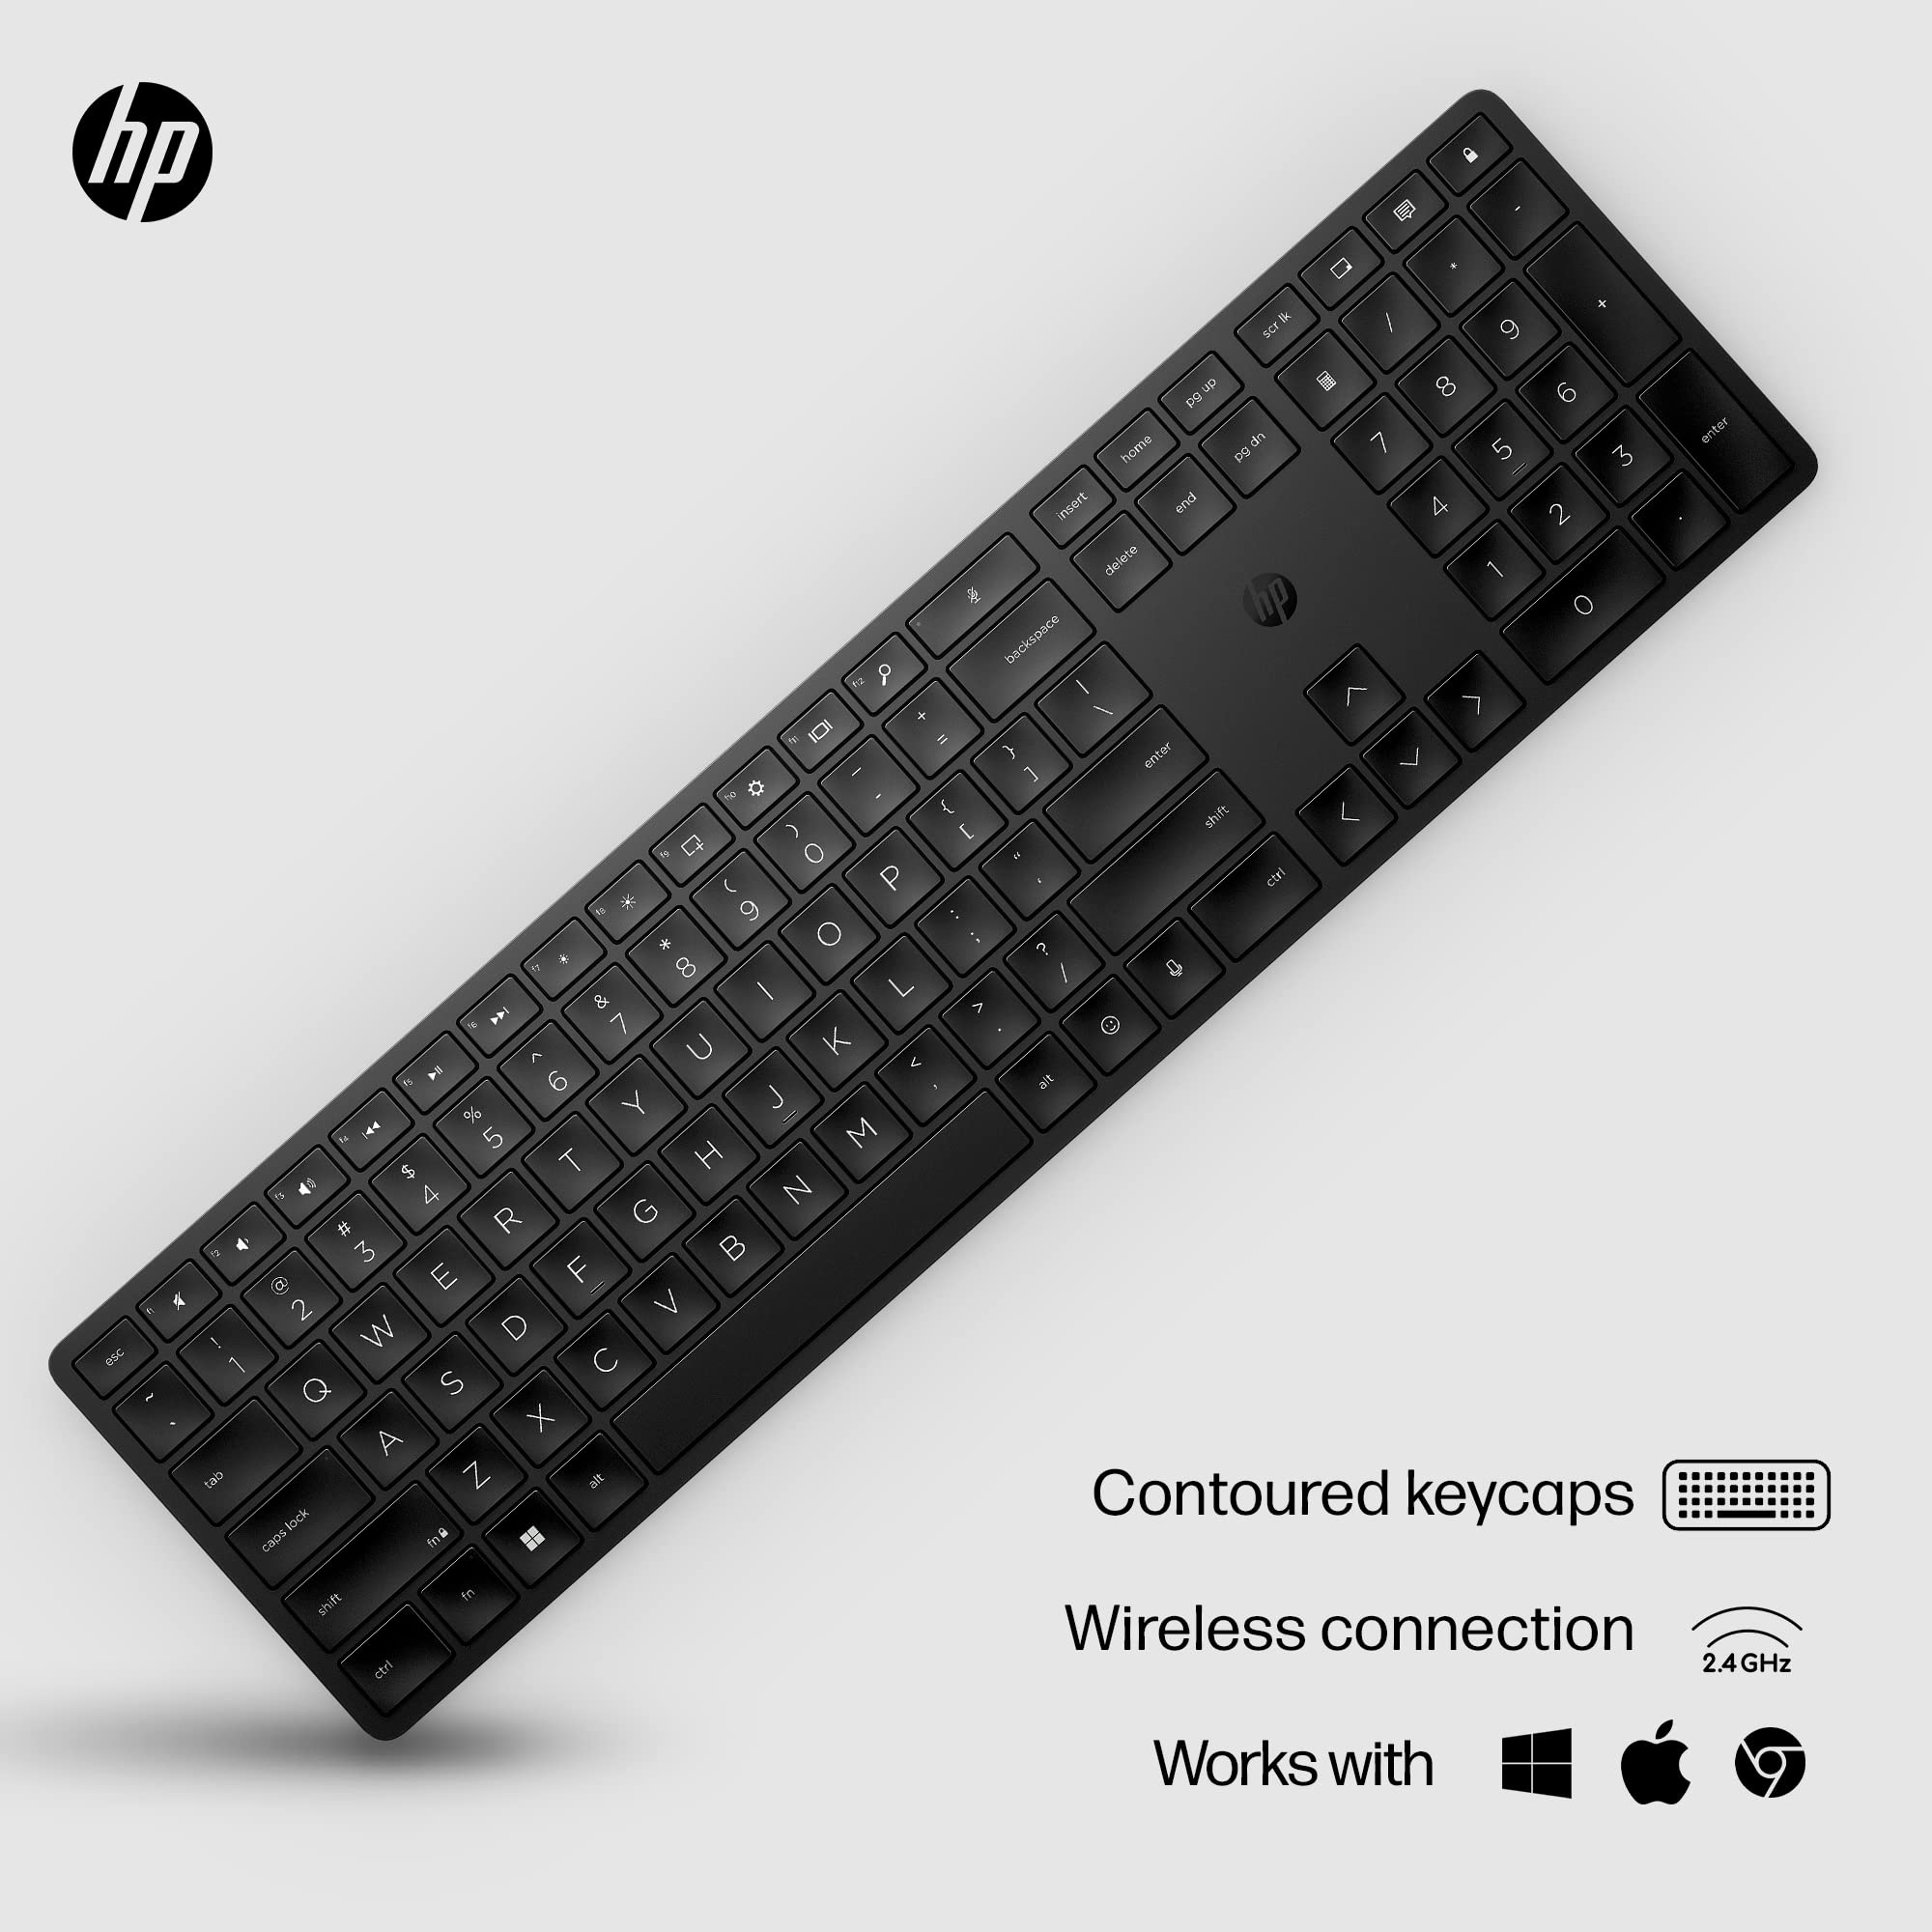 HP 450 Programmable Wireless Keyboard - Slim, Ergonomic Design w/Number Pad - Wireless USB - 20 Programmable Keys, 4 LEDs, Chiclet Keys - Up to 2-Year Battery Life - Win, Chrome, MacOS (‎4R184AA#ABL)